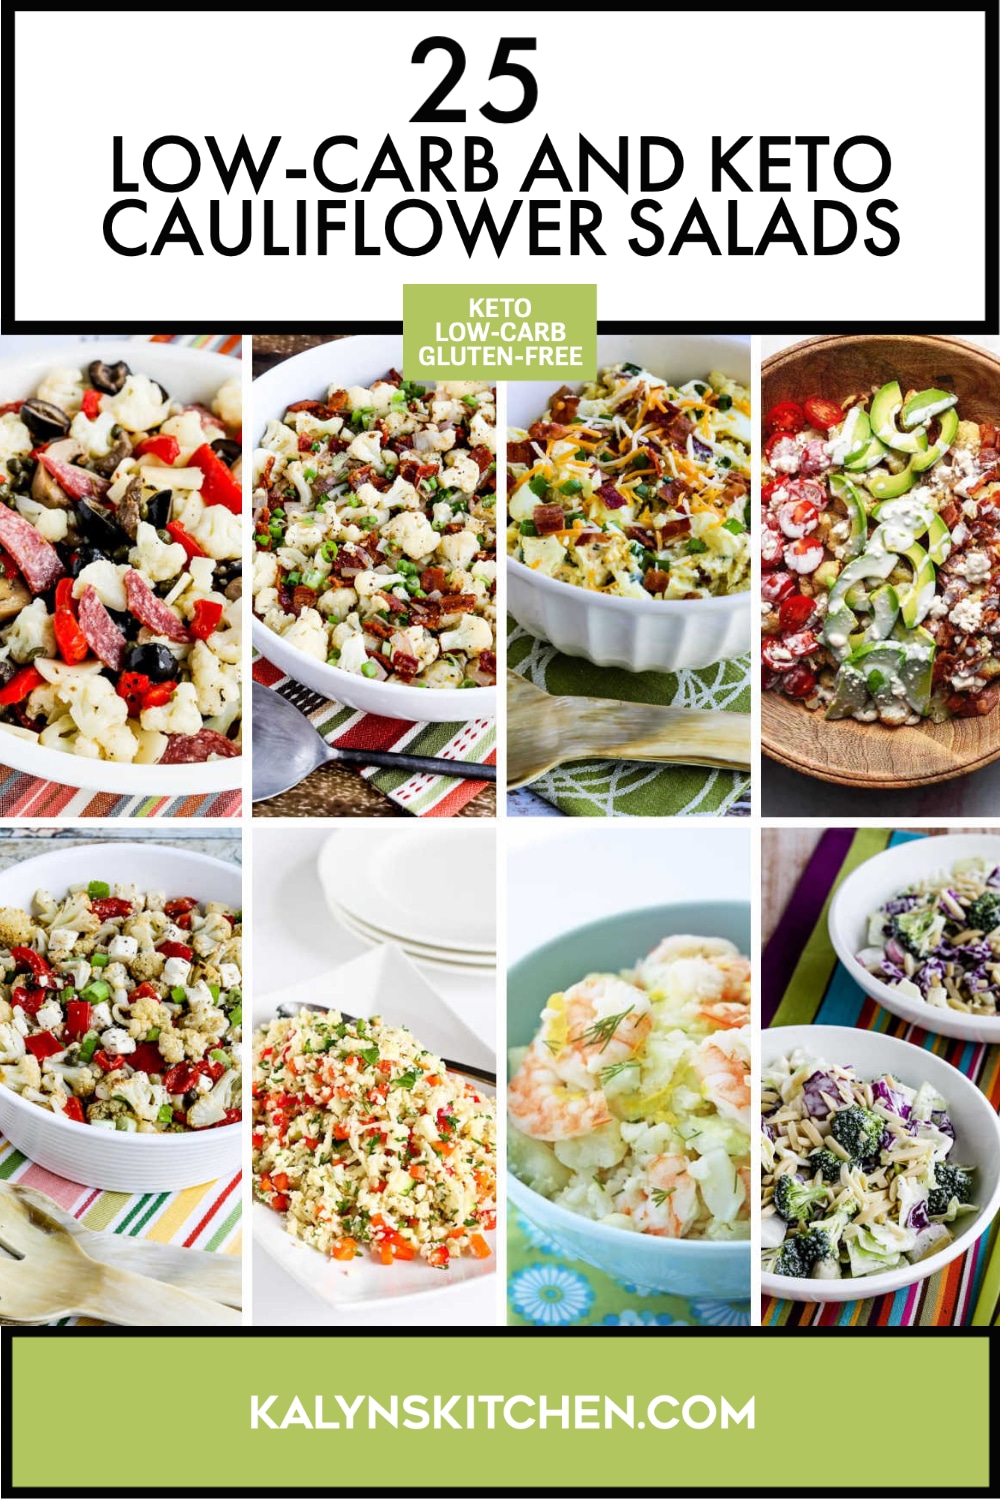 Pinterest image of 25 Low-Carb and Keto Cauliflower Salads